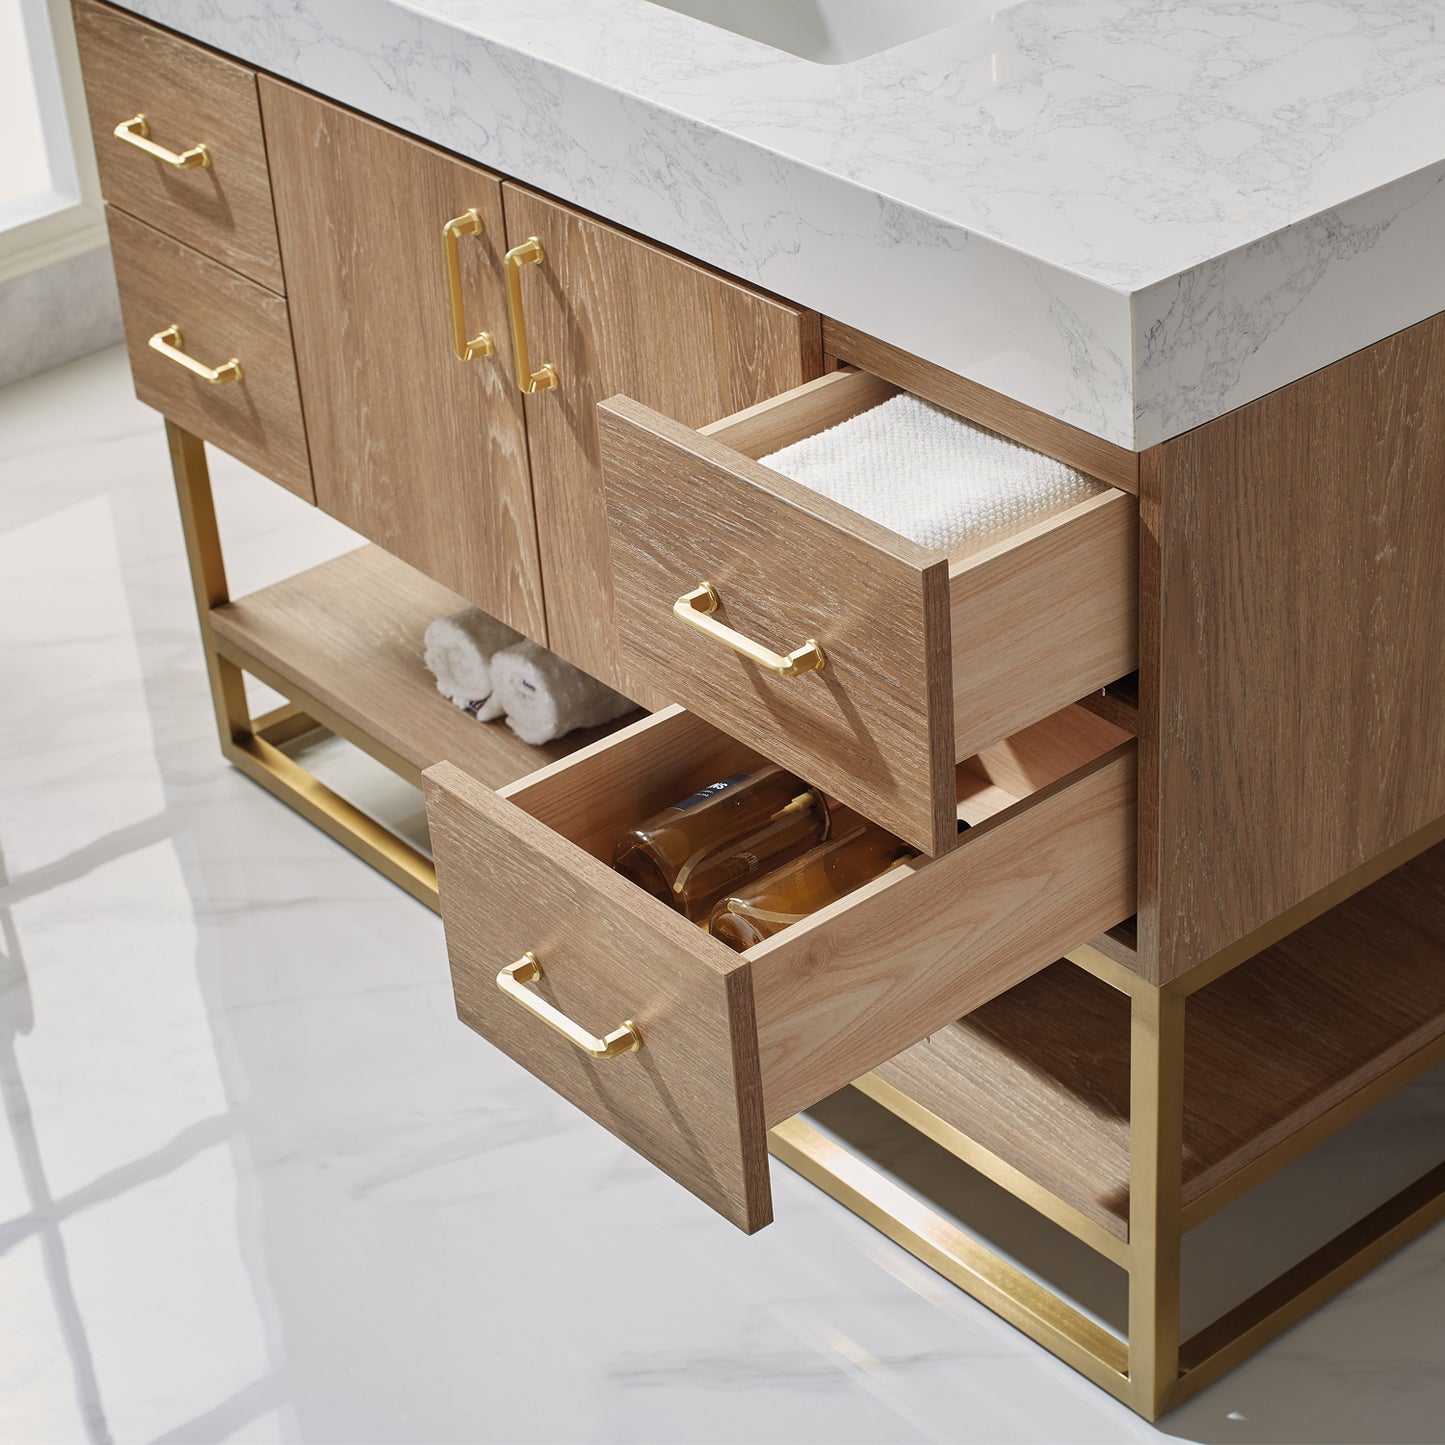 Alistair 48" Single Vanity in North American Oak with White Grain Stone Countertop With Mirror